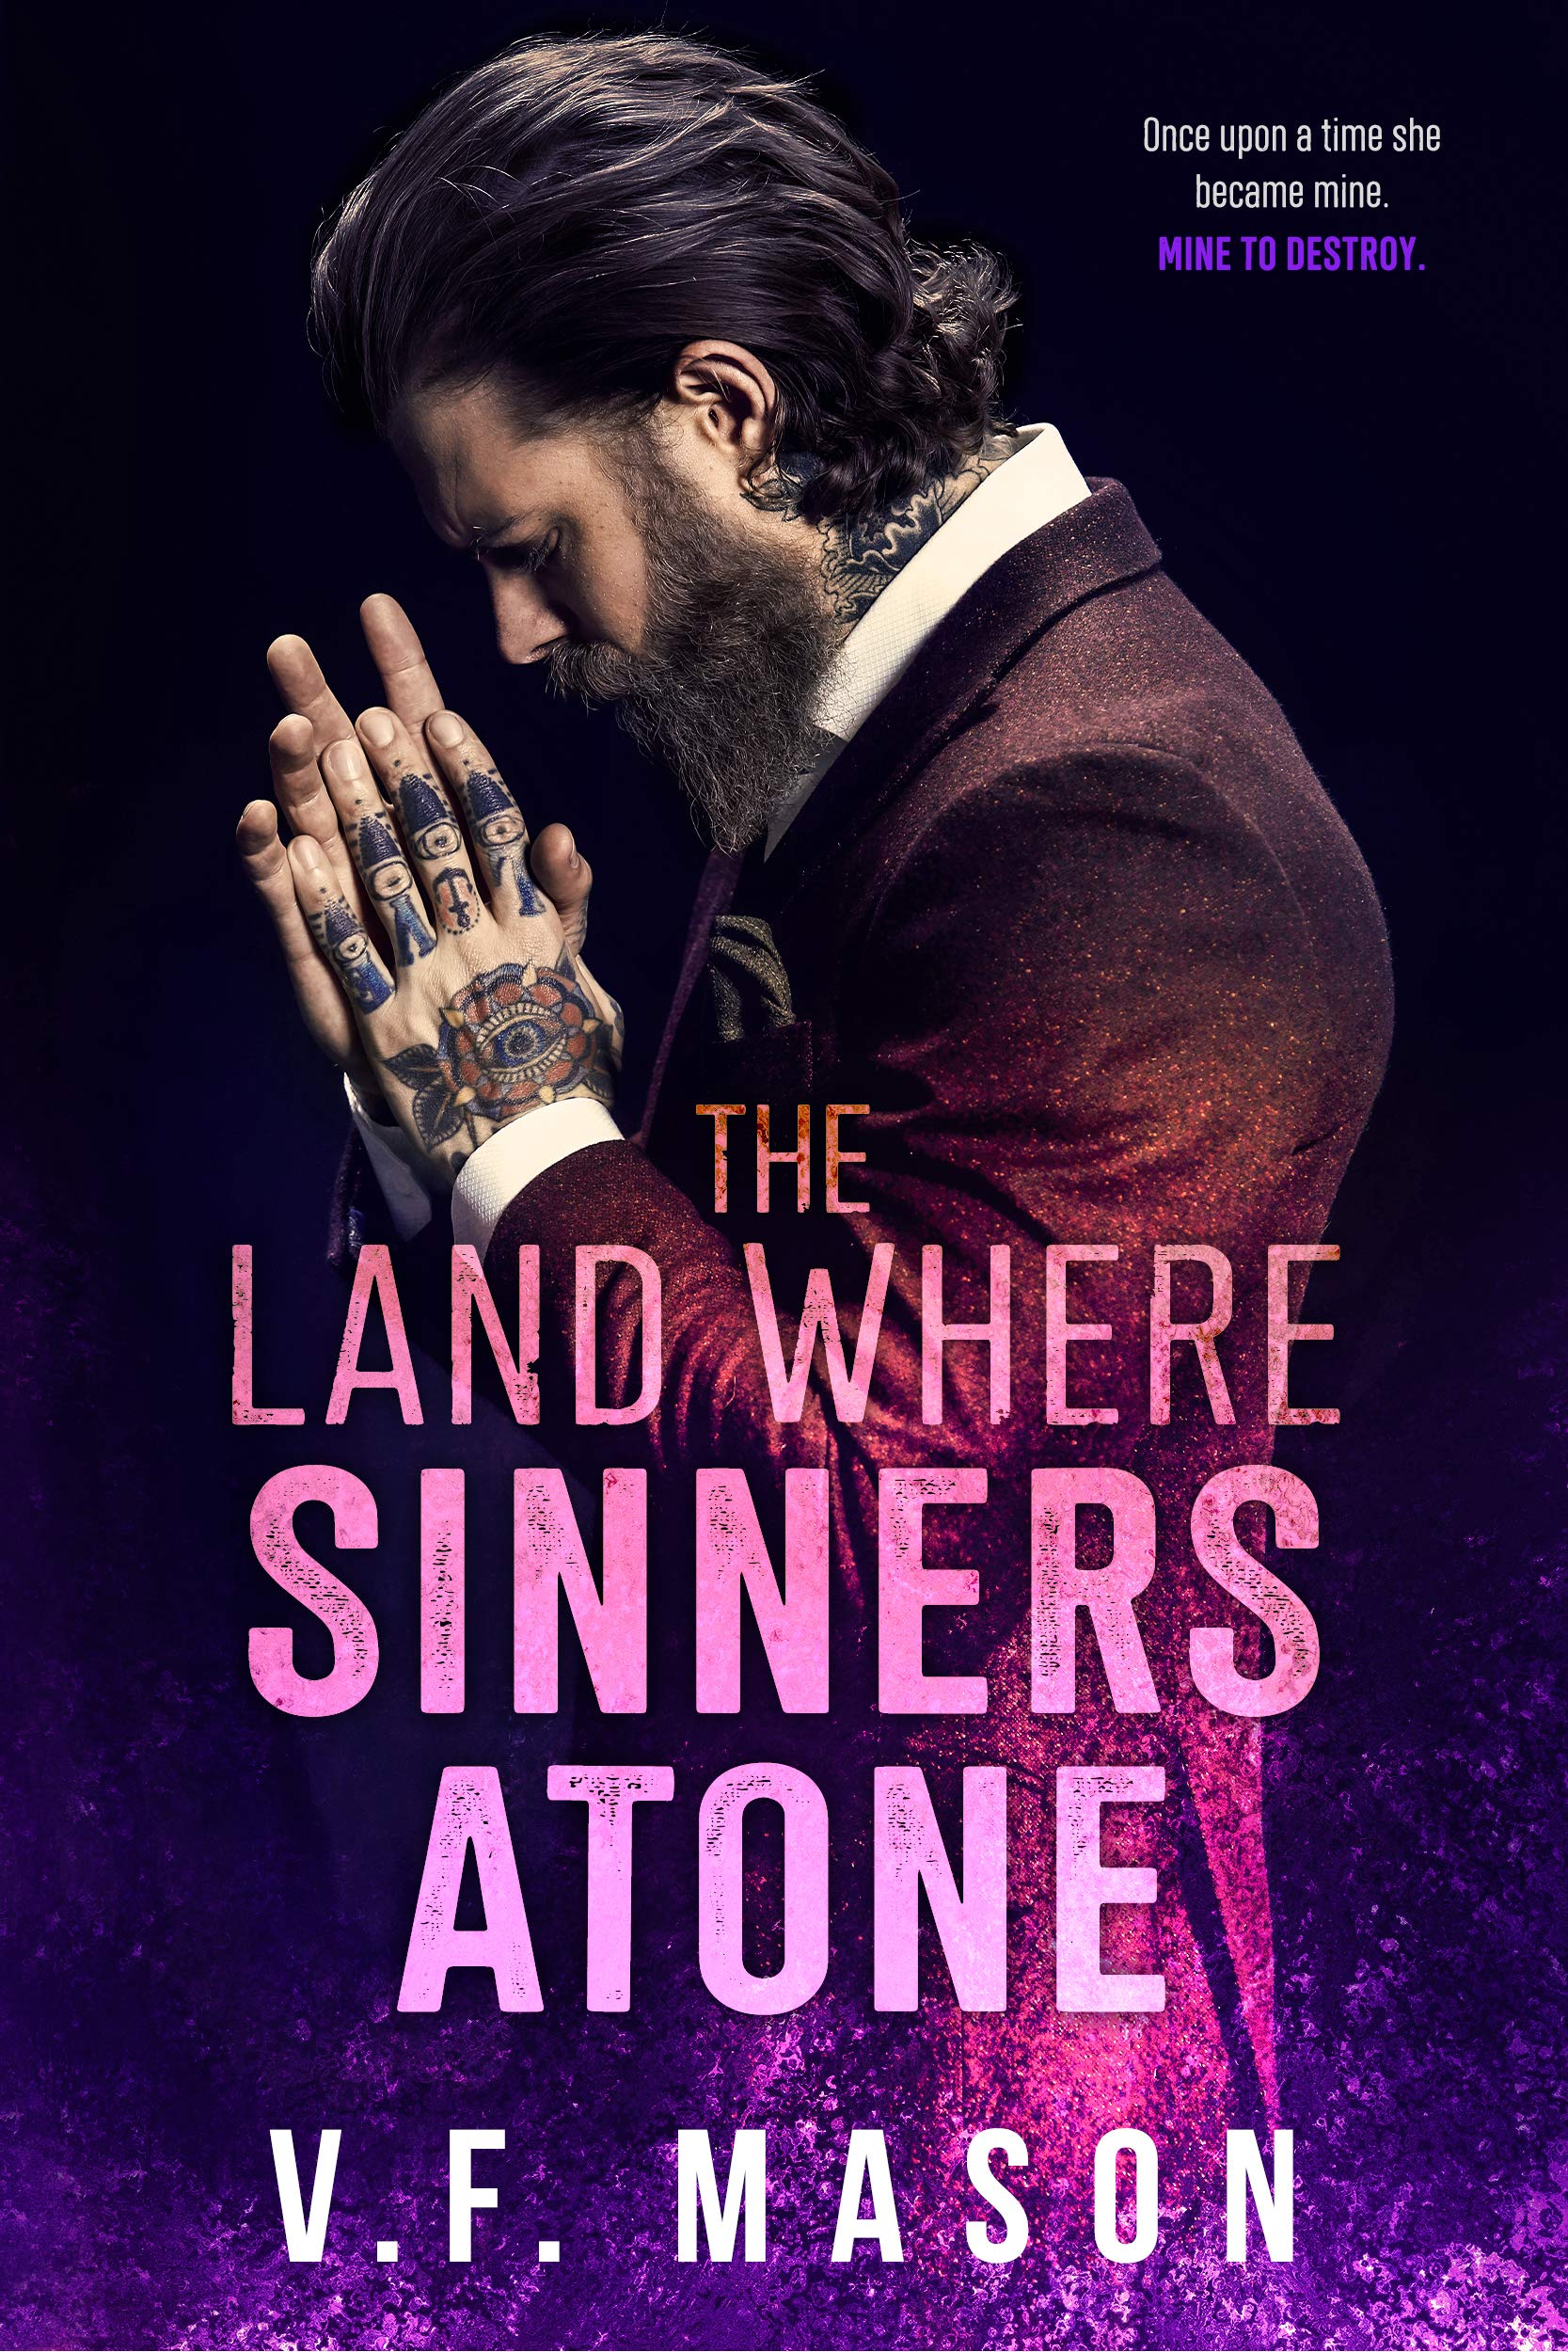 The Land Where Sinners Love by V.F. Mason PDF Download